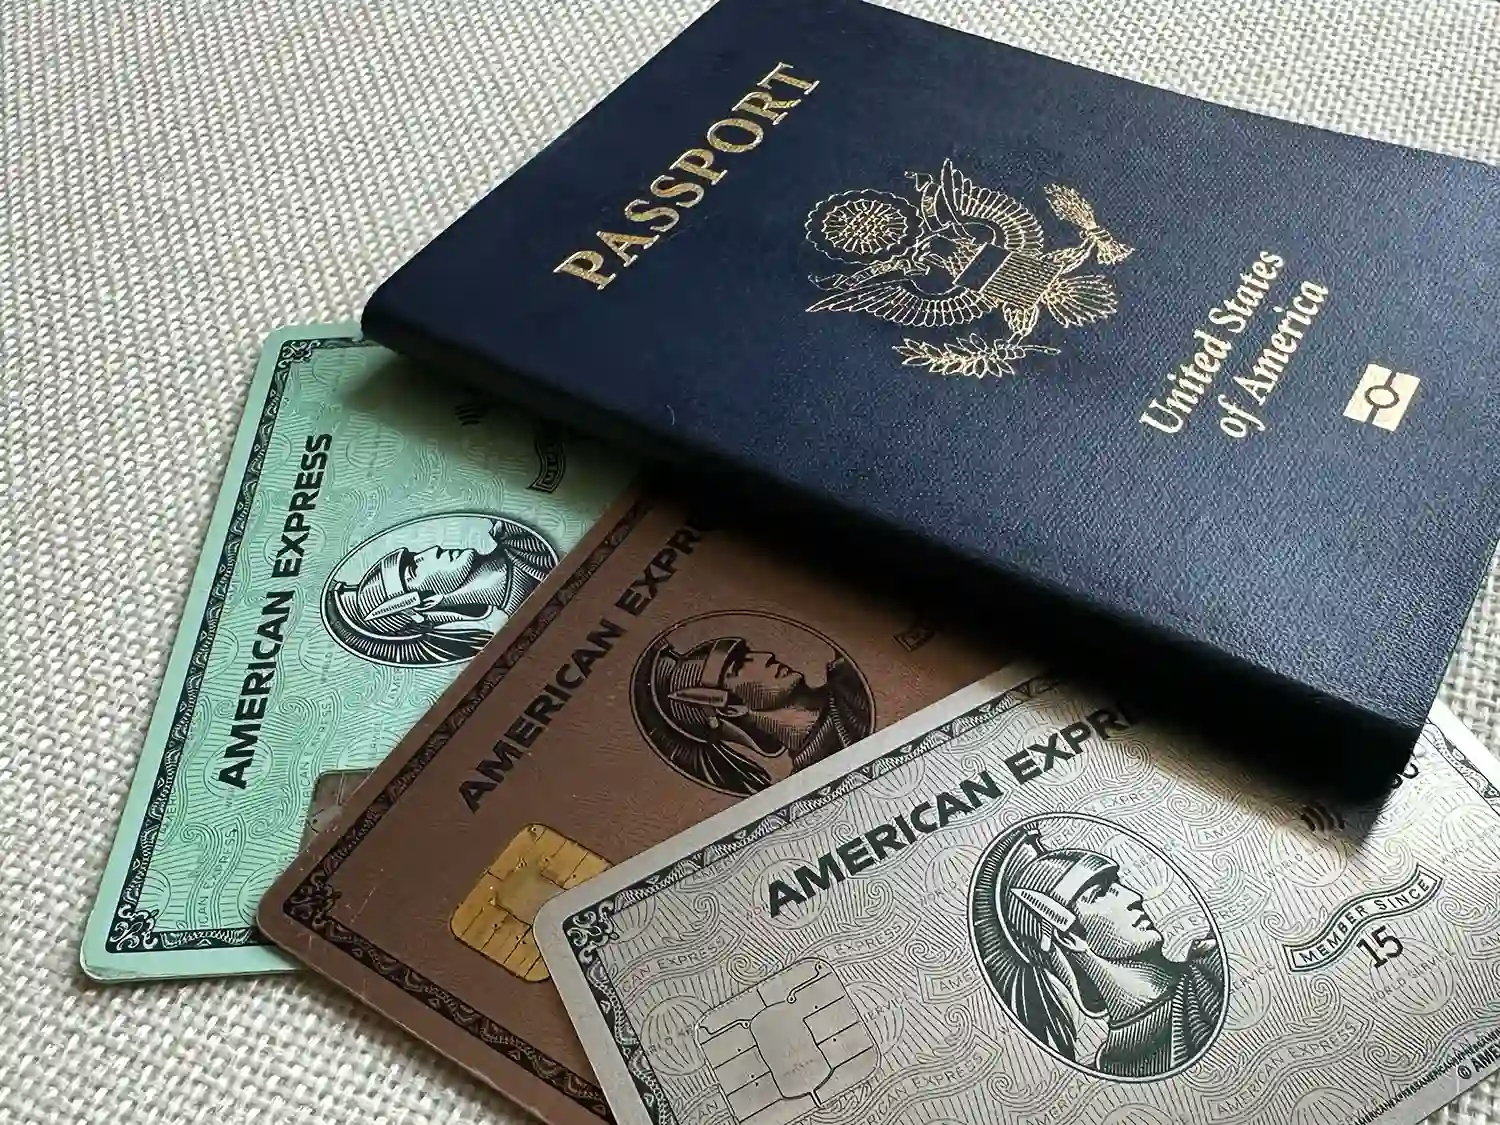 Three cards from American Express — the Green Card, the Gold Card, and the Platinum Card — peeking out from underneath a US passport